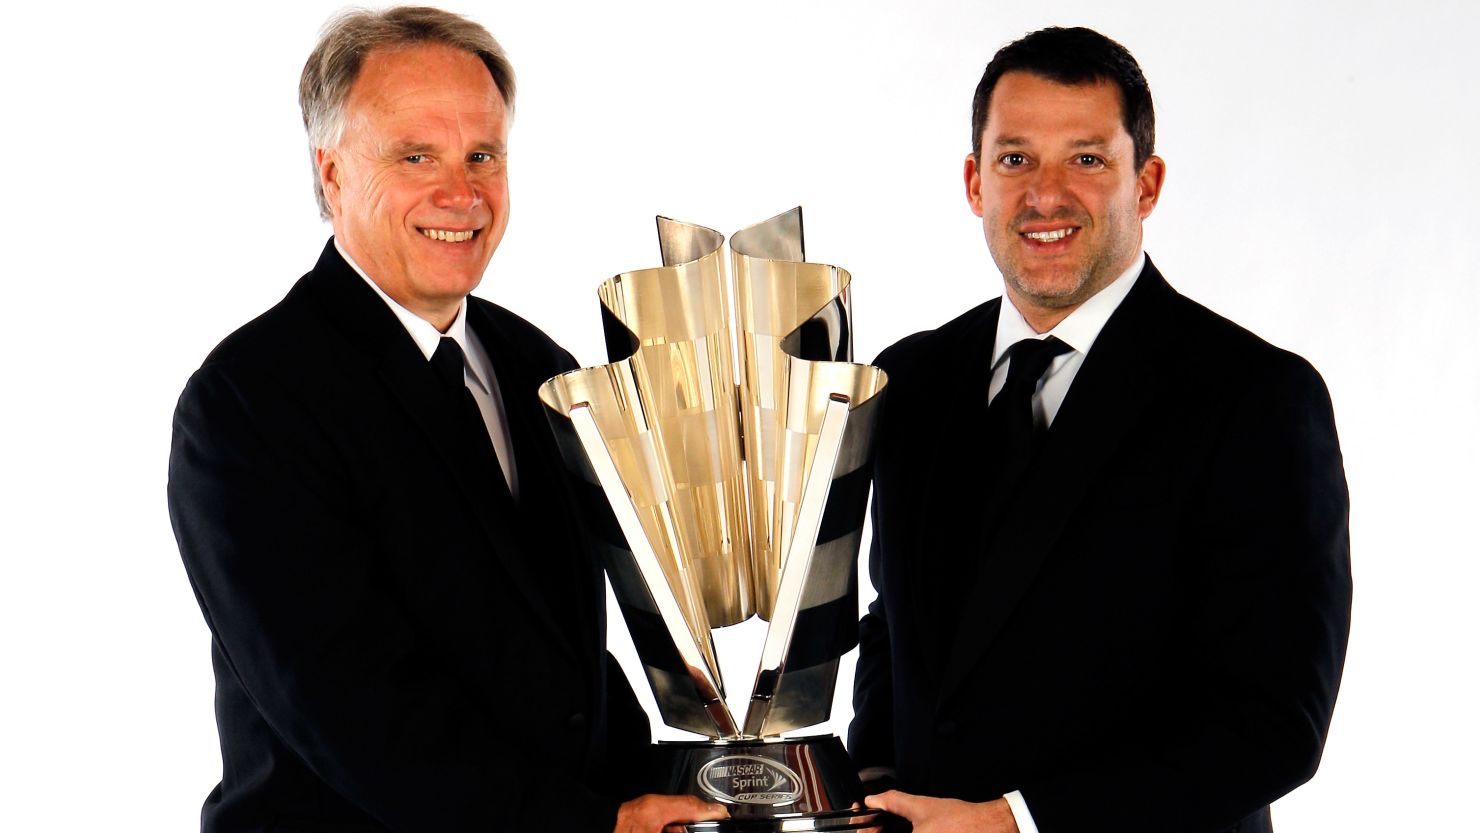 Gene Haas (left) has tasted success in NASCAR with team co-owner Tony Stewart (right) and could now turn to F1.